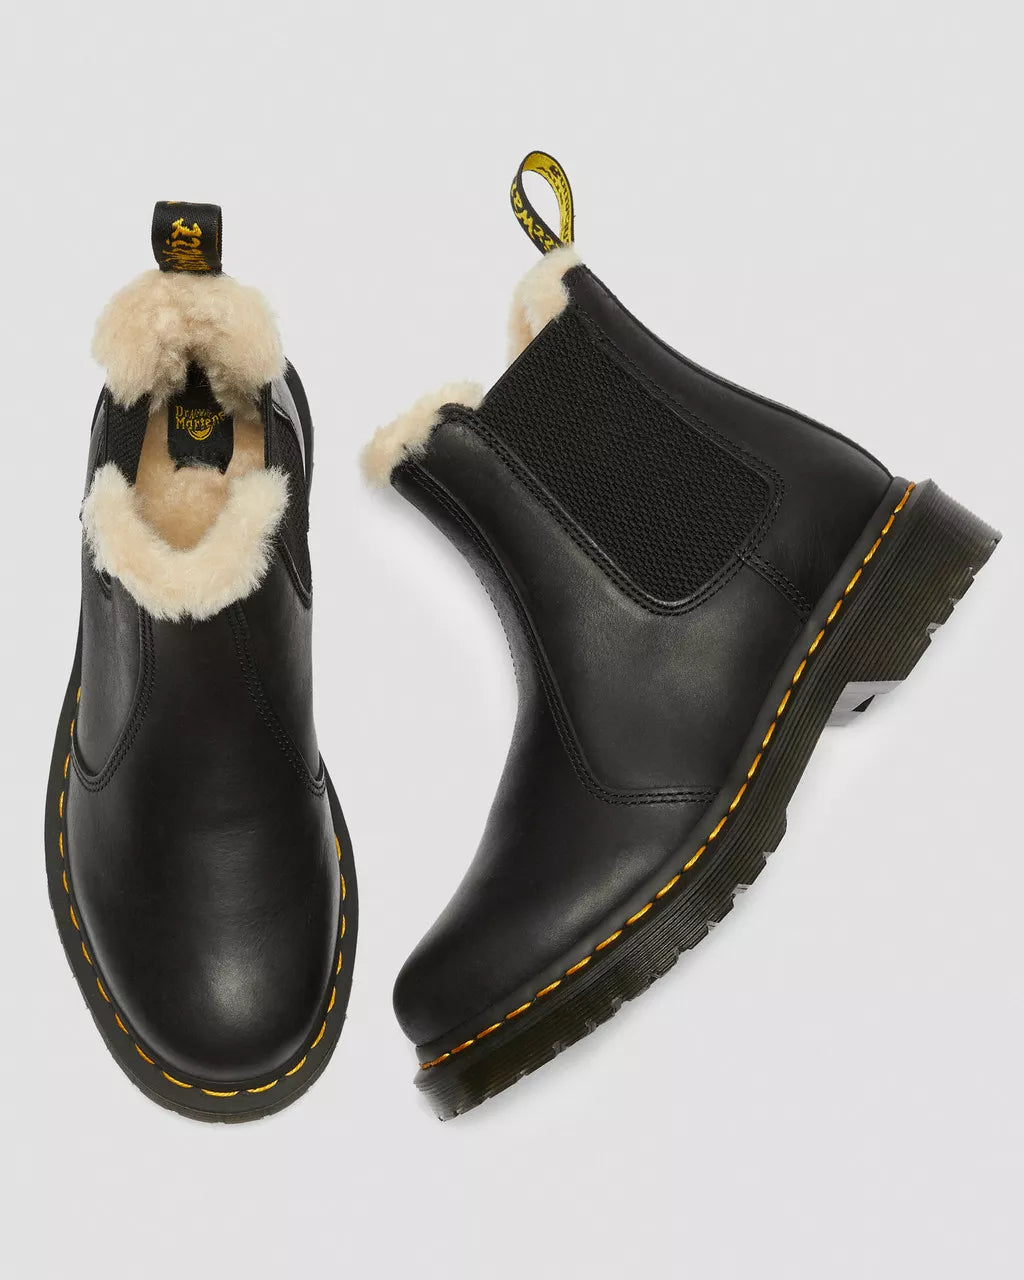 Dr. Martens 2976 Leonore Black Burnished Wyoming 21045001